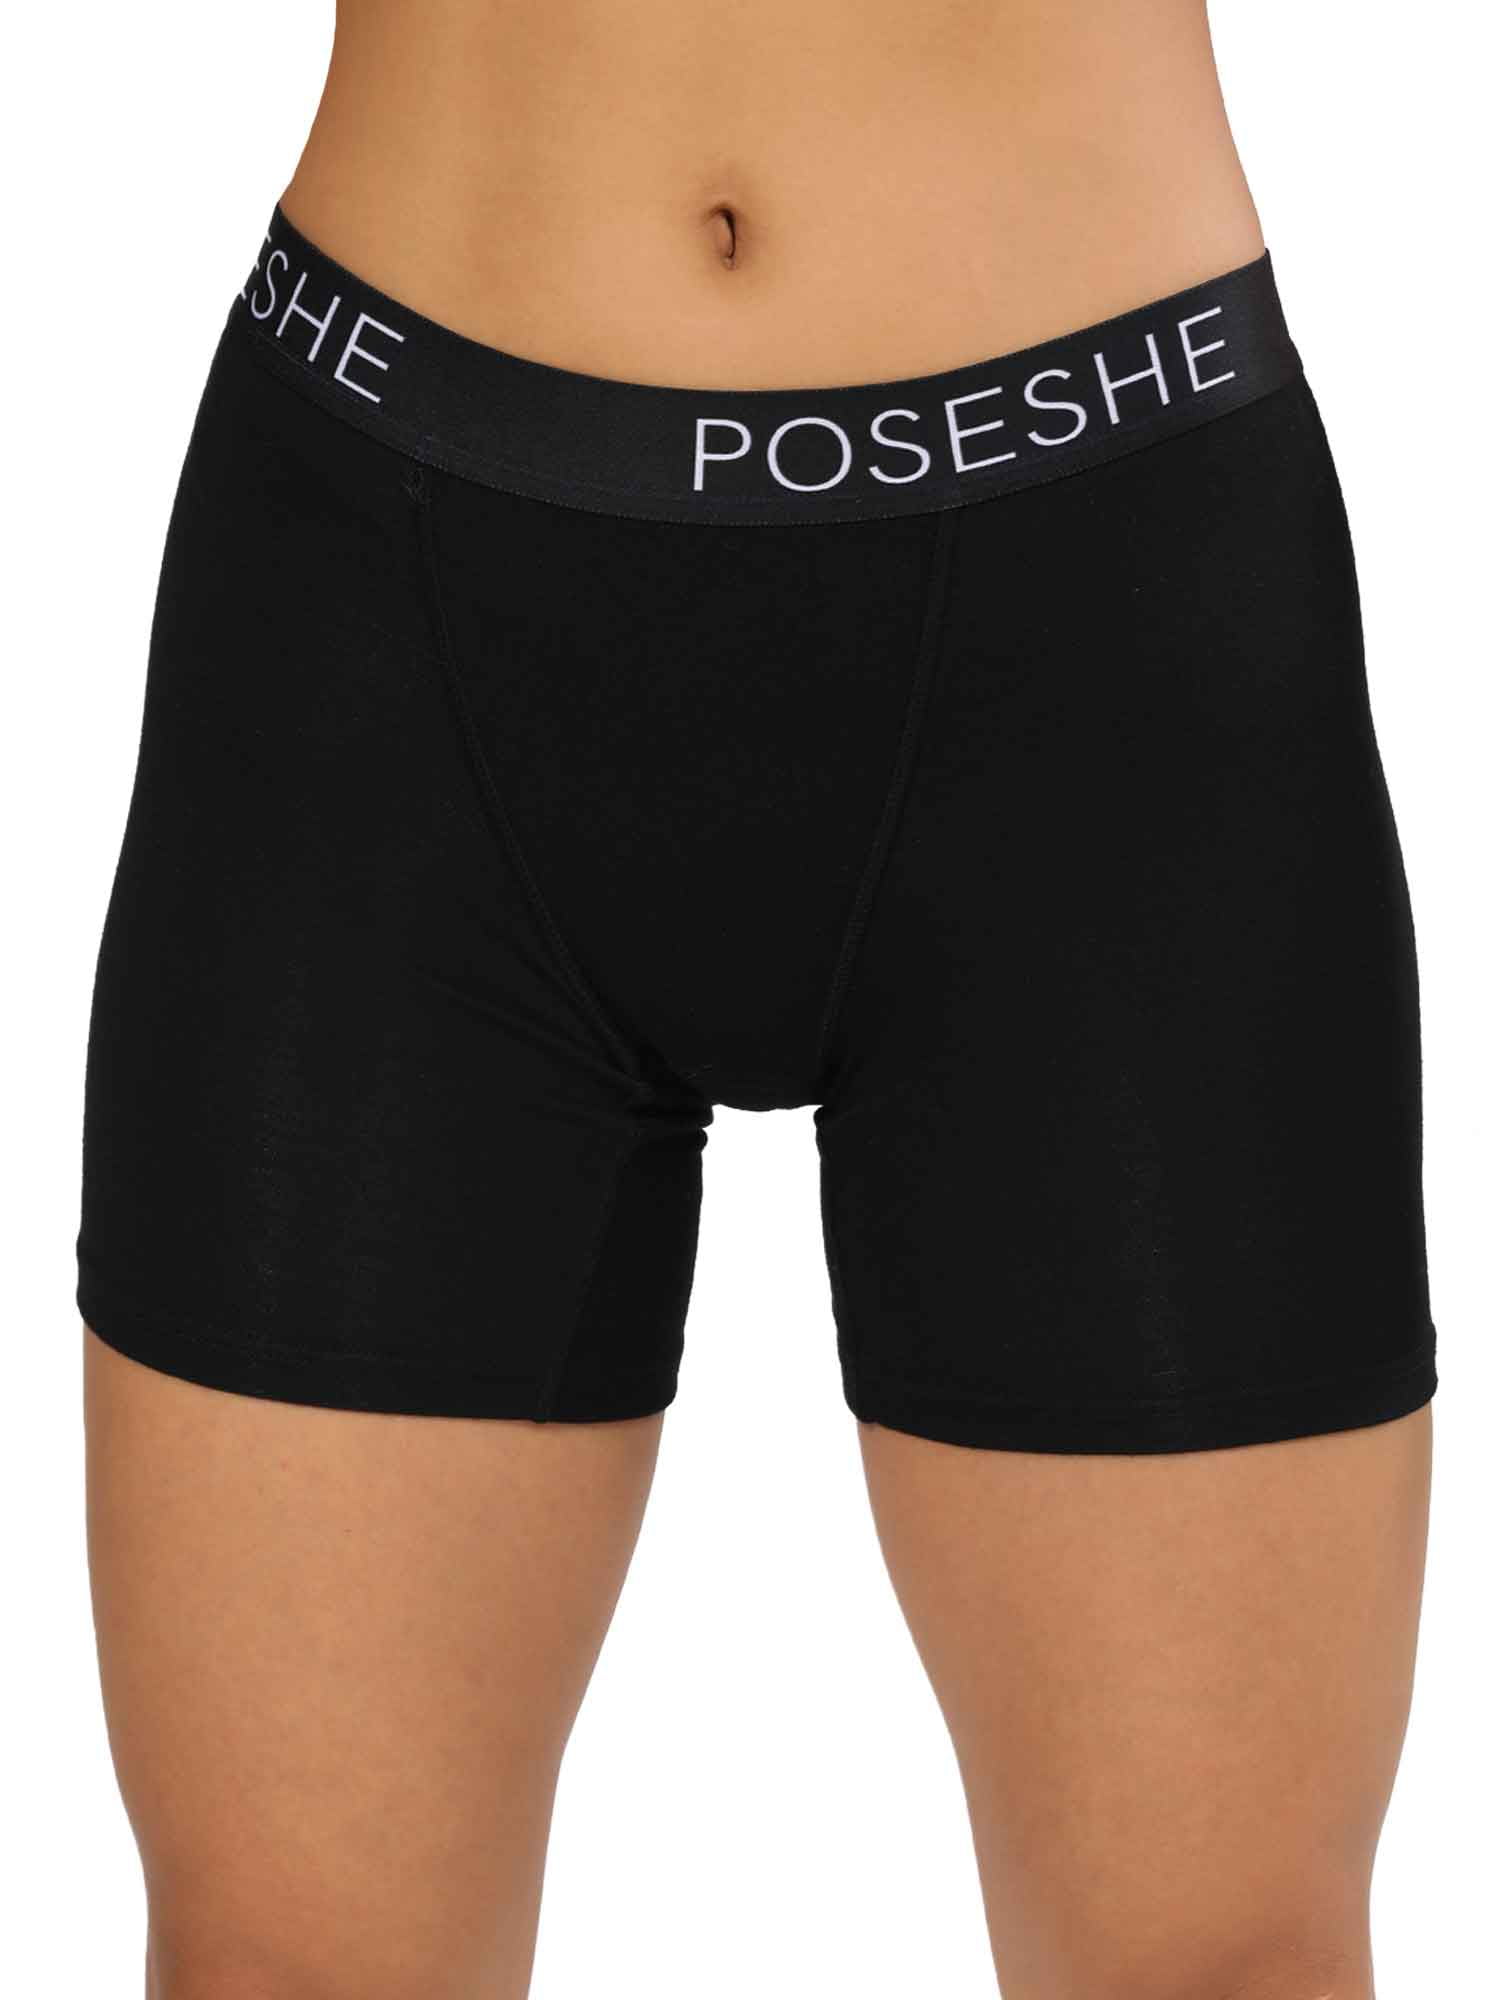 POSESHE Women's Boxer Briefs 6 Inseam, Ultra-soft MicroModal Boyshorts  Underwear, Bee Mixed Color - 6 Inseam - 3 Pack,Small at  Women's  Clothing store